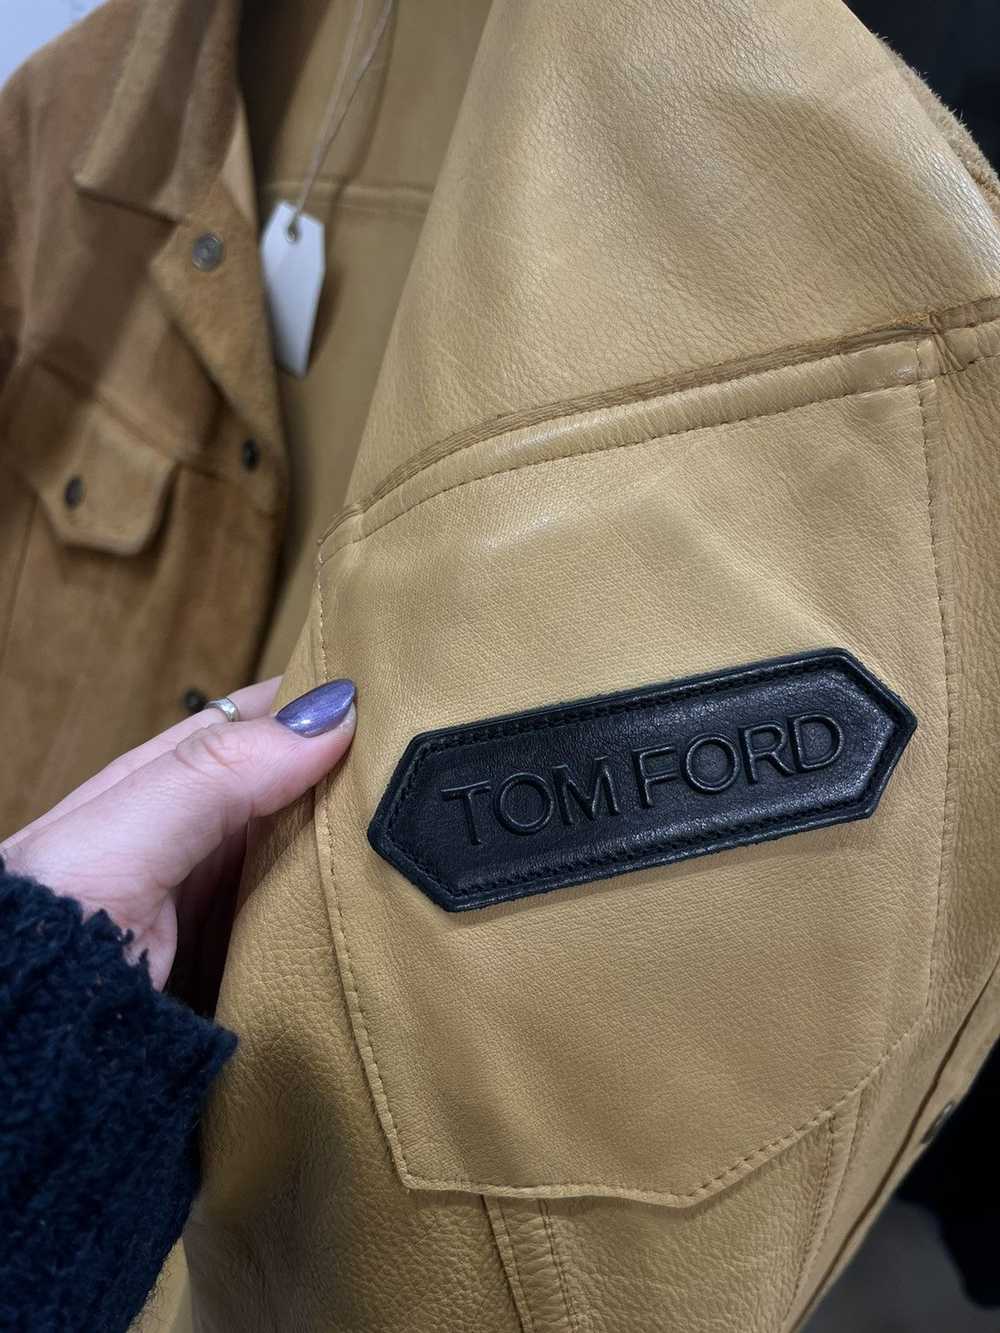 Tom Ford Tom Ford Suede Leather Jacket - image 7